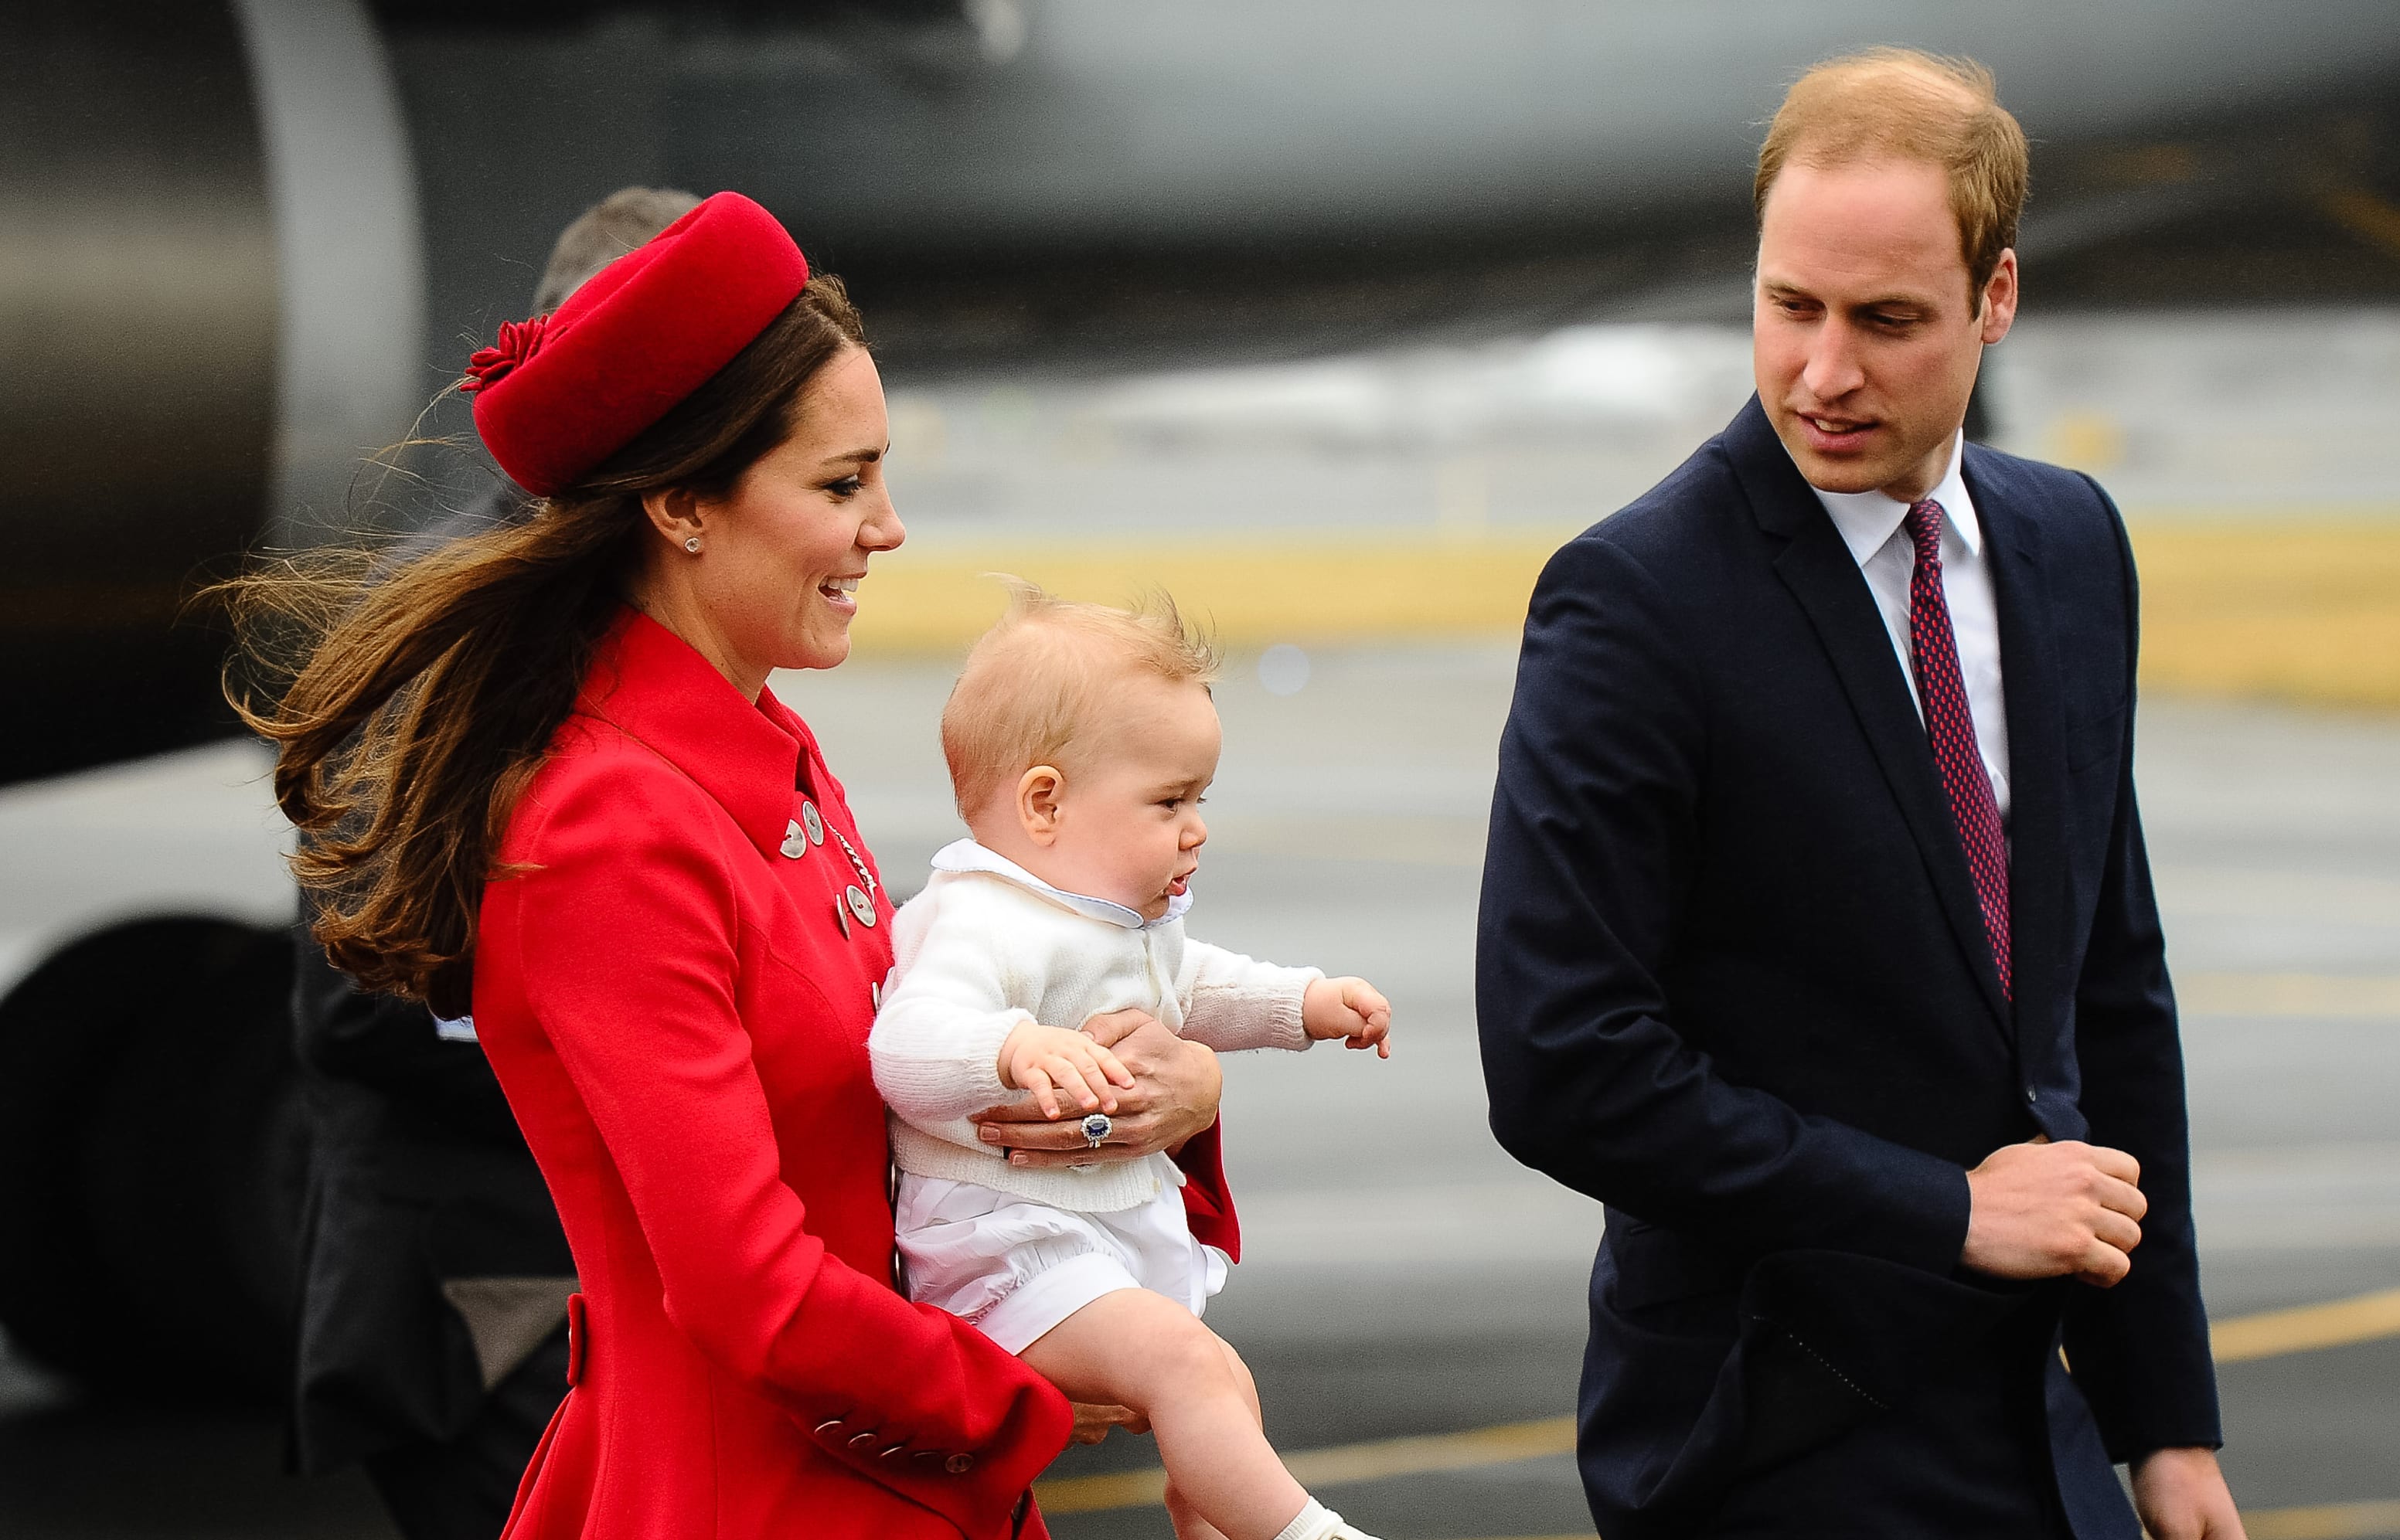 Prince William and Duchess of Cambridge, Catherine, carrying Prince George upon their arrival at the international airport in Wellington on April 7, 2014.